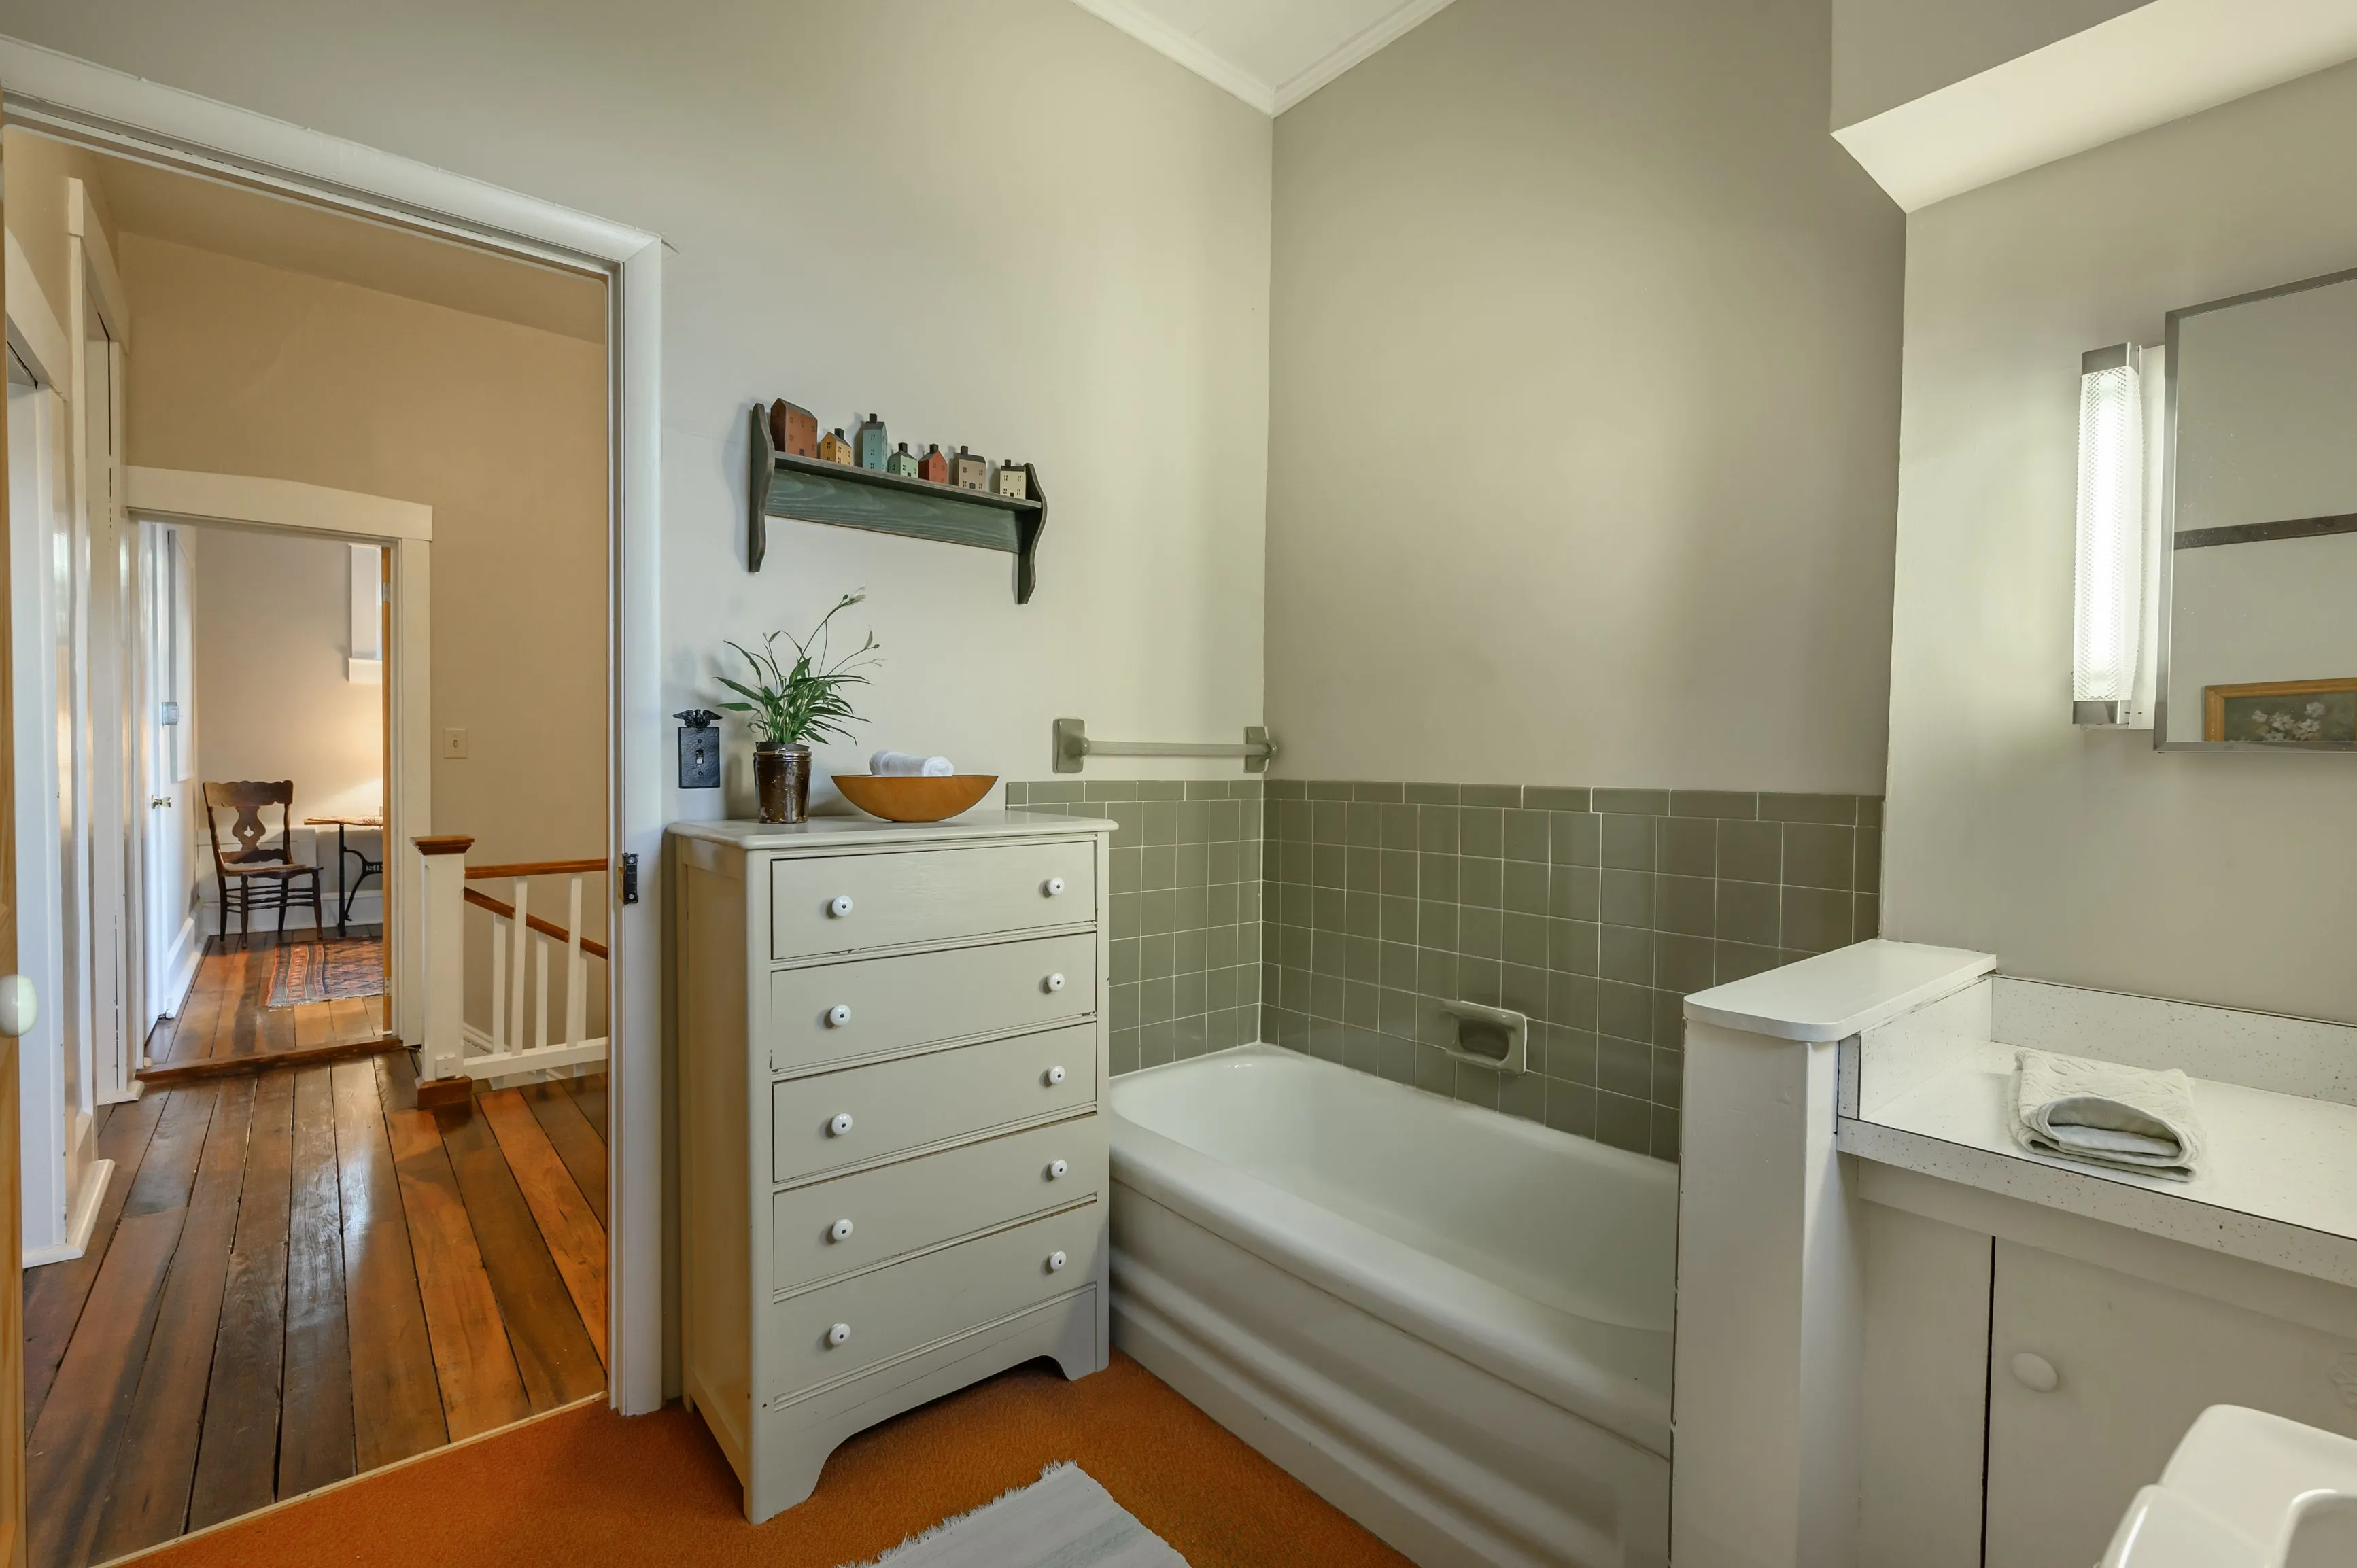 A cozy bathroom with a white bathtub and vanity, wooden floors, gray tiles, and a decorative shelf, with a view into a hallway.